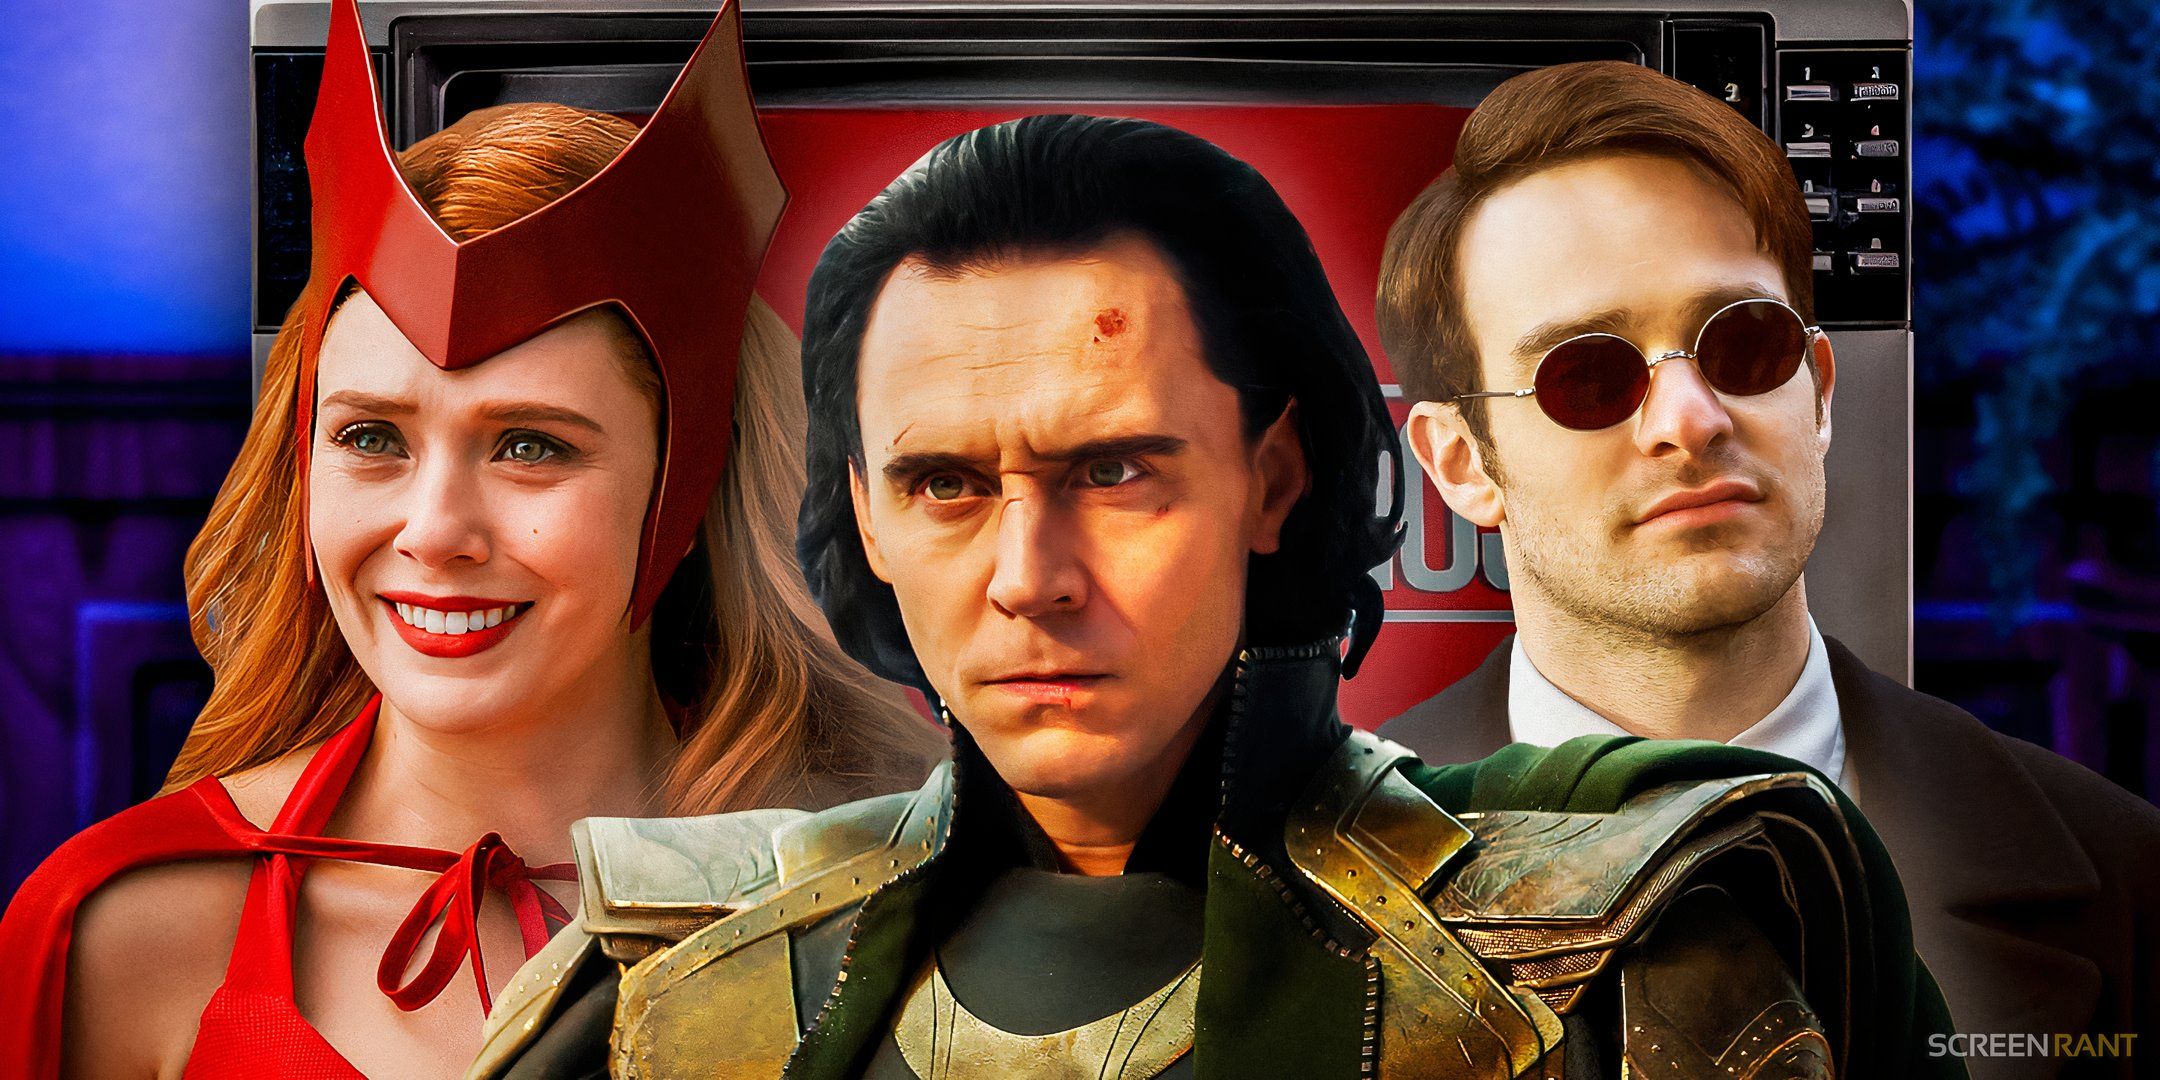 Elizabeth Olsen's Scarlet Witch in her Halloween costume, Tom Hiddleston's Loki, and Charlie Cox's Matt Murdock in front of a TV with the Marvel Studios logo